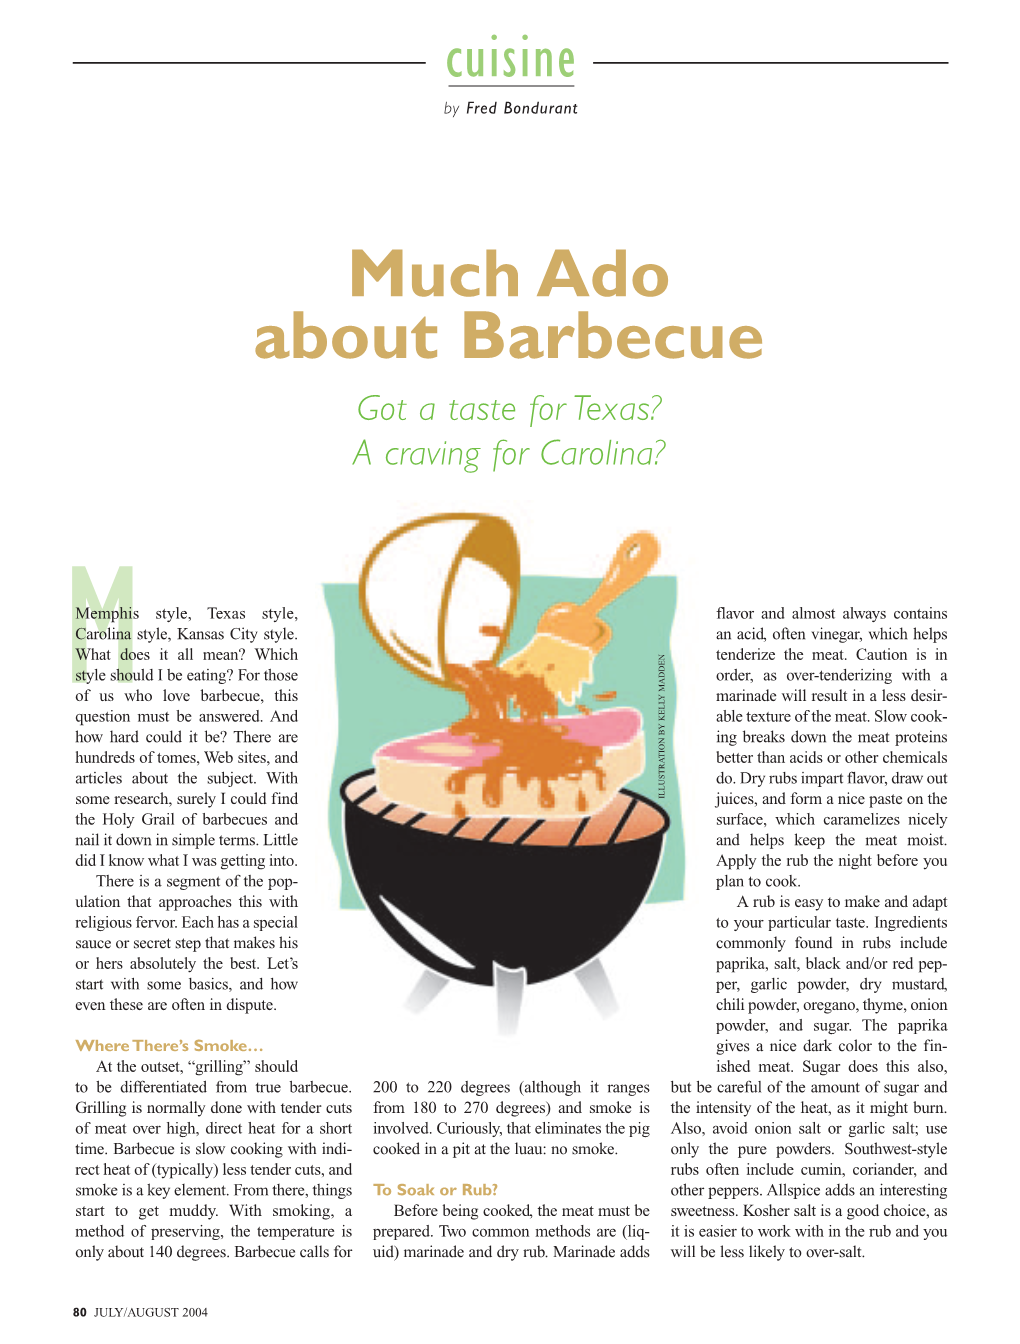 Much Ado About Barbecue Got a Taste for Texas? a Craving for Carolina?